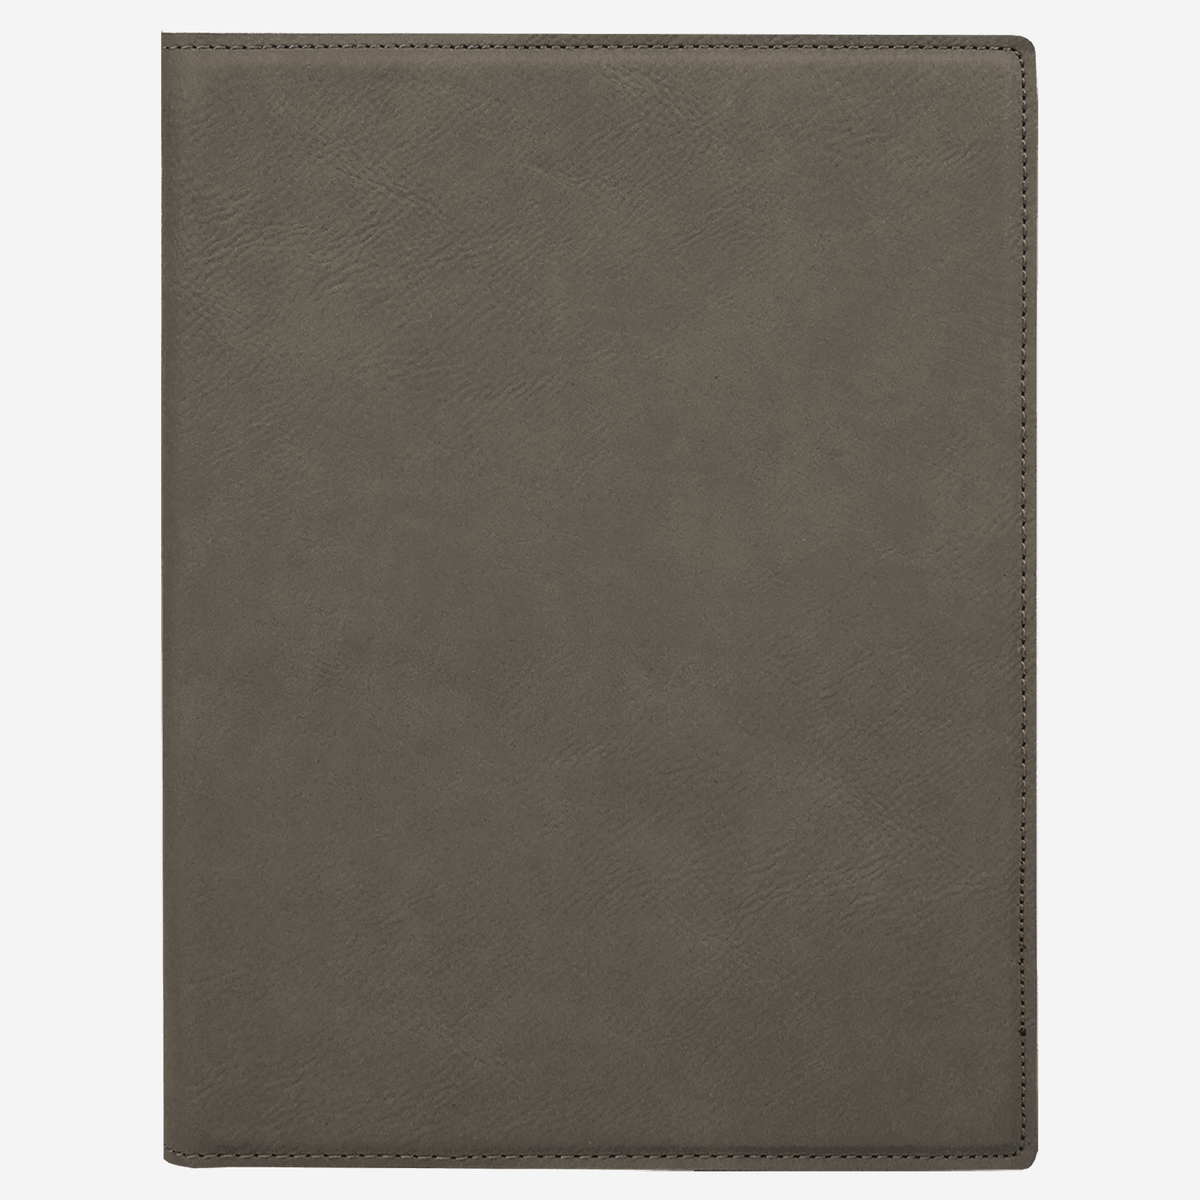 7" x 9" Laserable Gray Leatherette Small Portfolio with Notepad no engraving